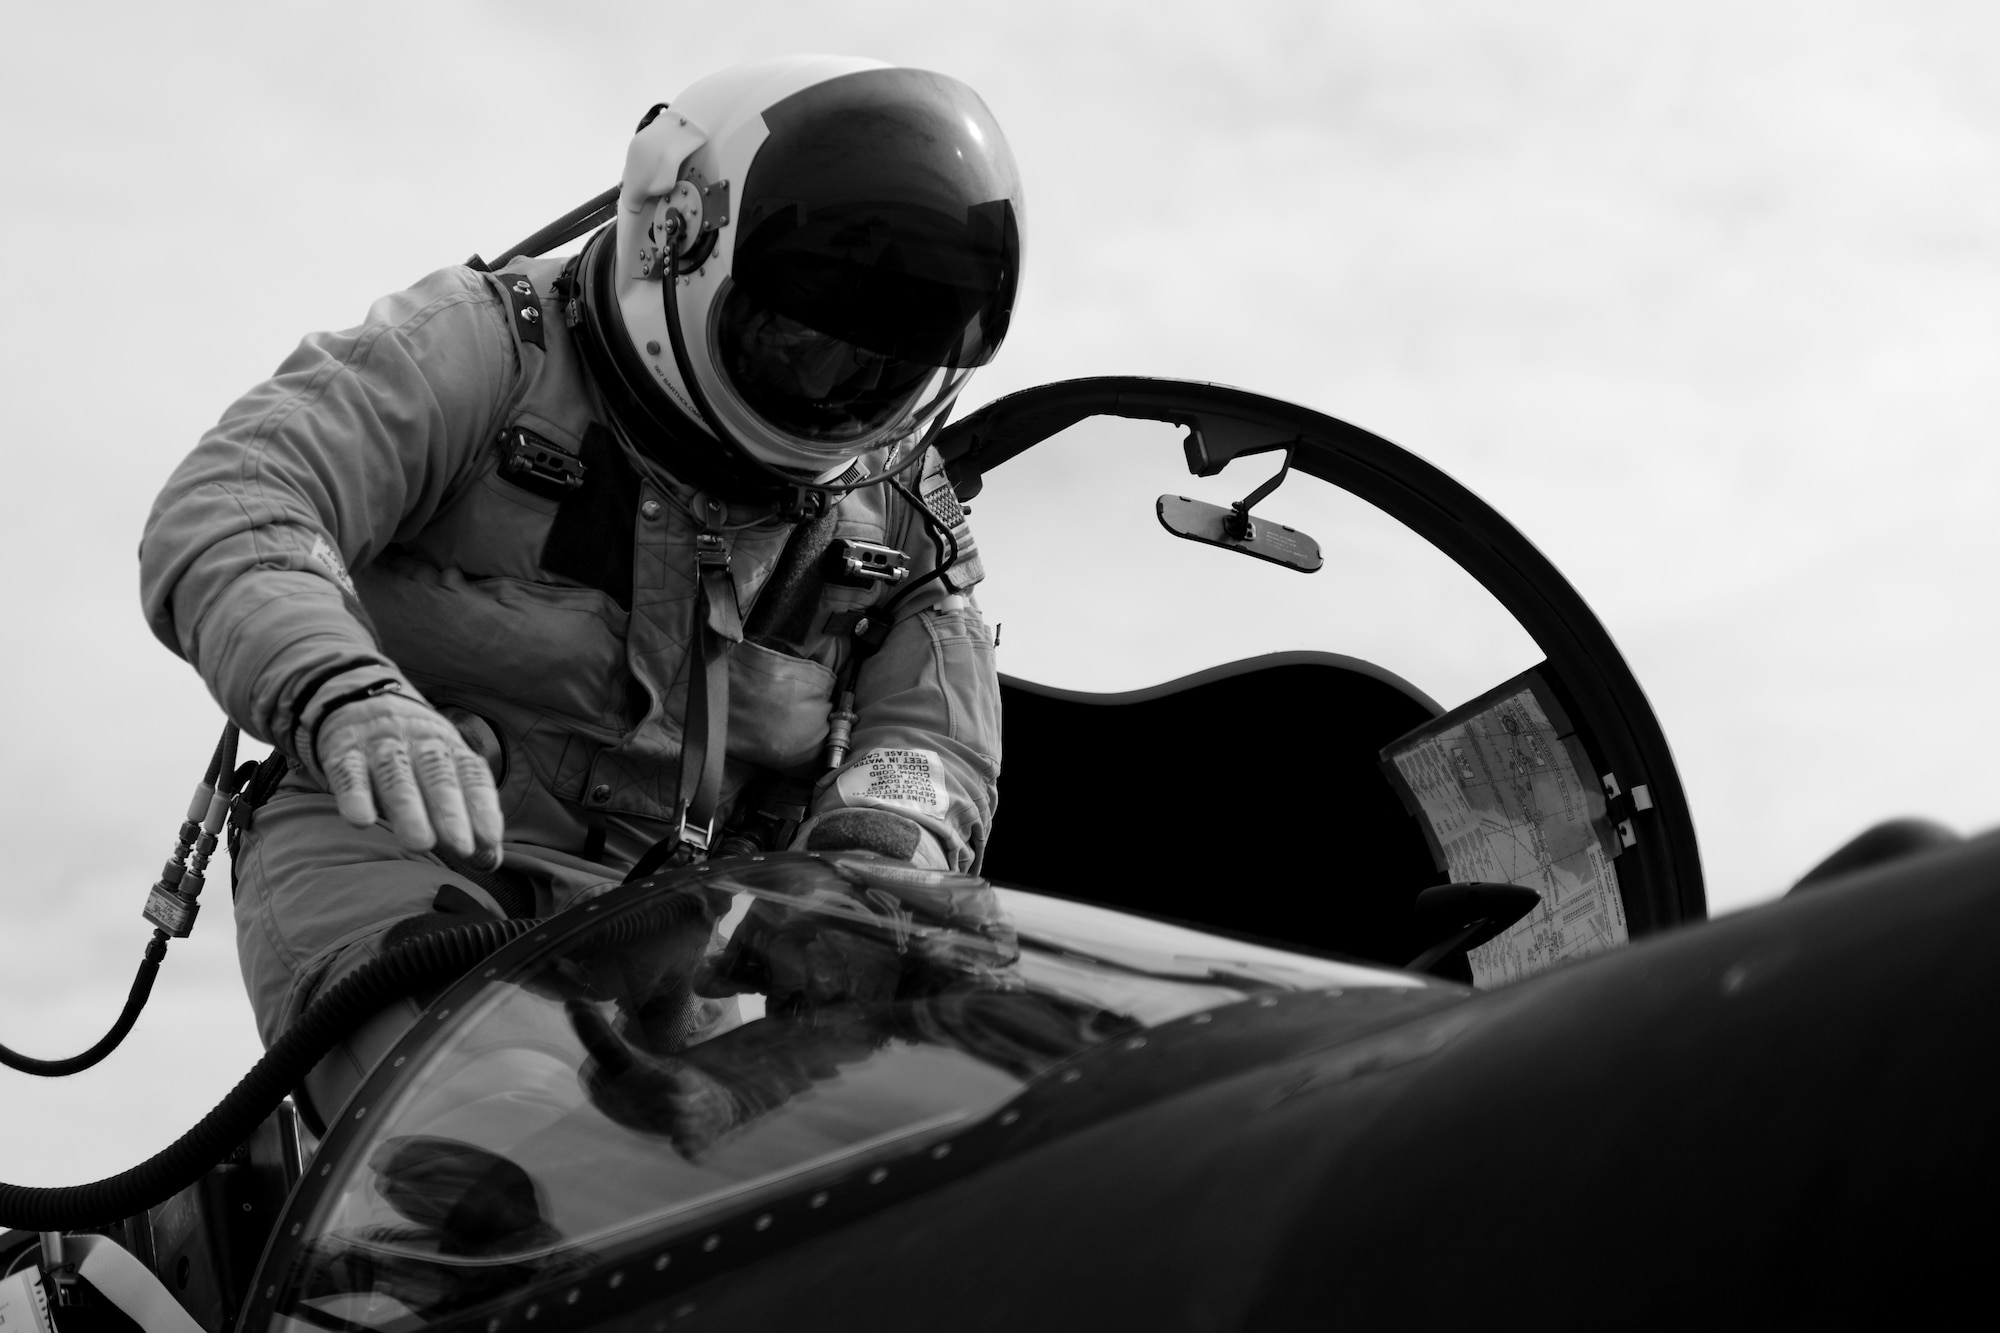 U.S. Air Force Maj. Cory Bartholomew, U-2 Dragon Lady pilot from the 9th Reconnaissance Wing, climbs into the cockpit of his aircraft before taking flight at RAF Fairford, United Kingdom, June 6, 2014.